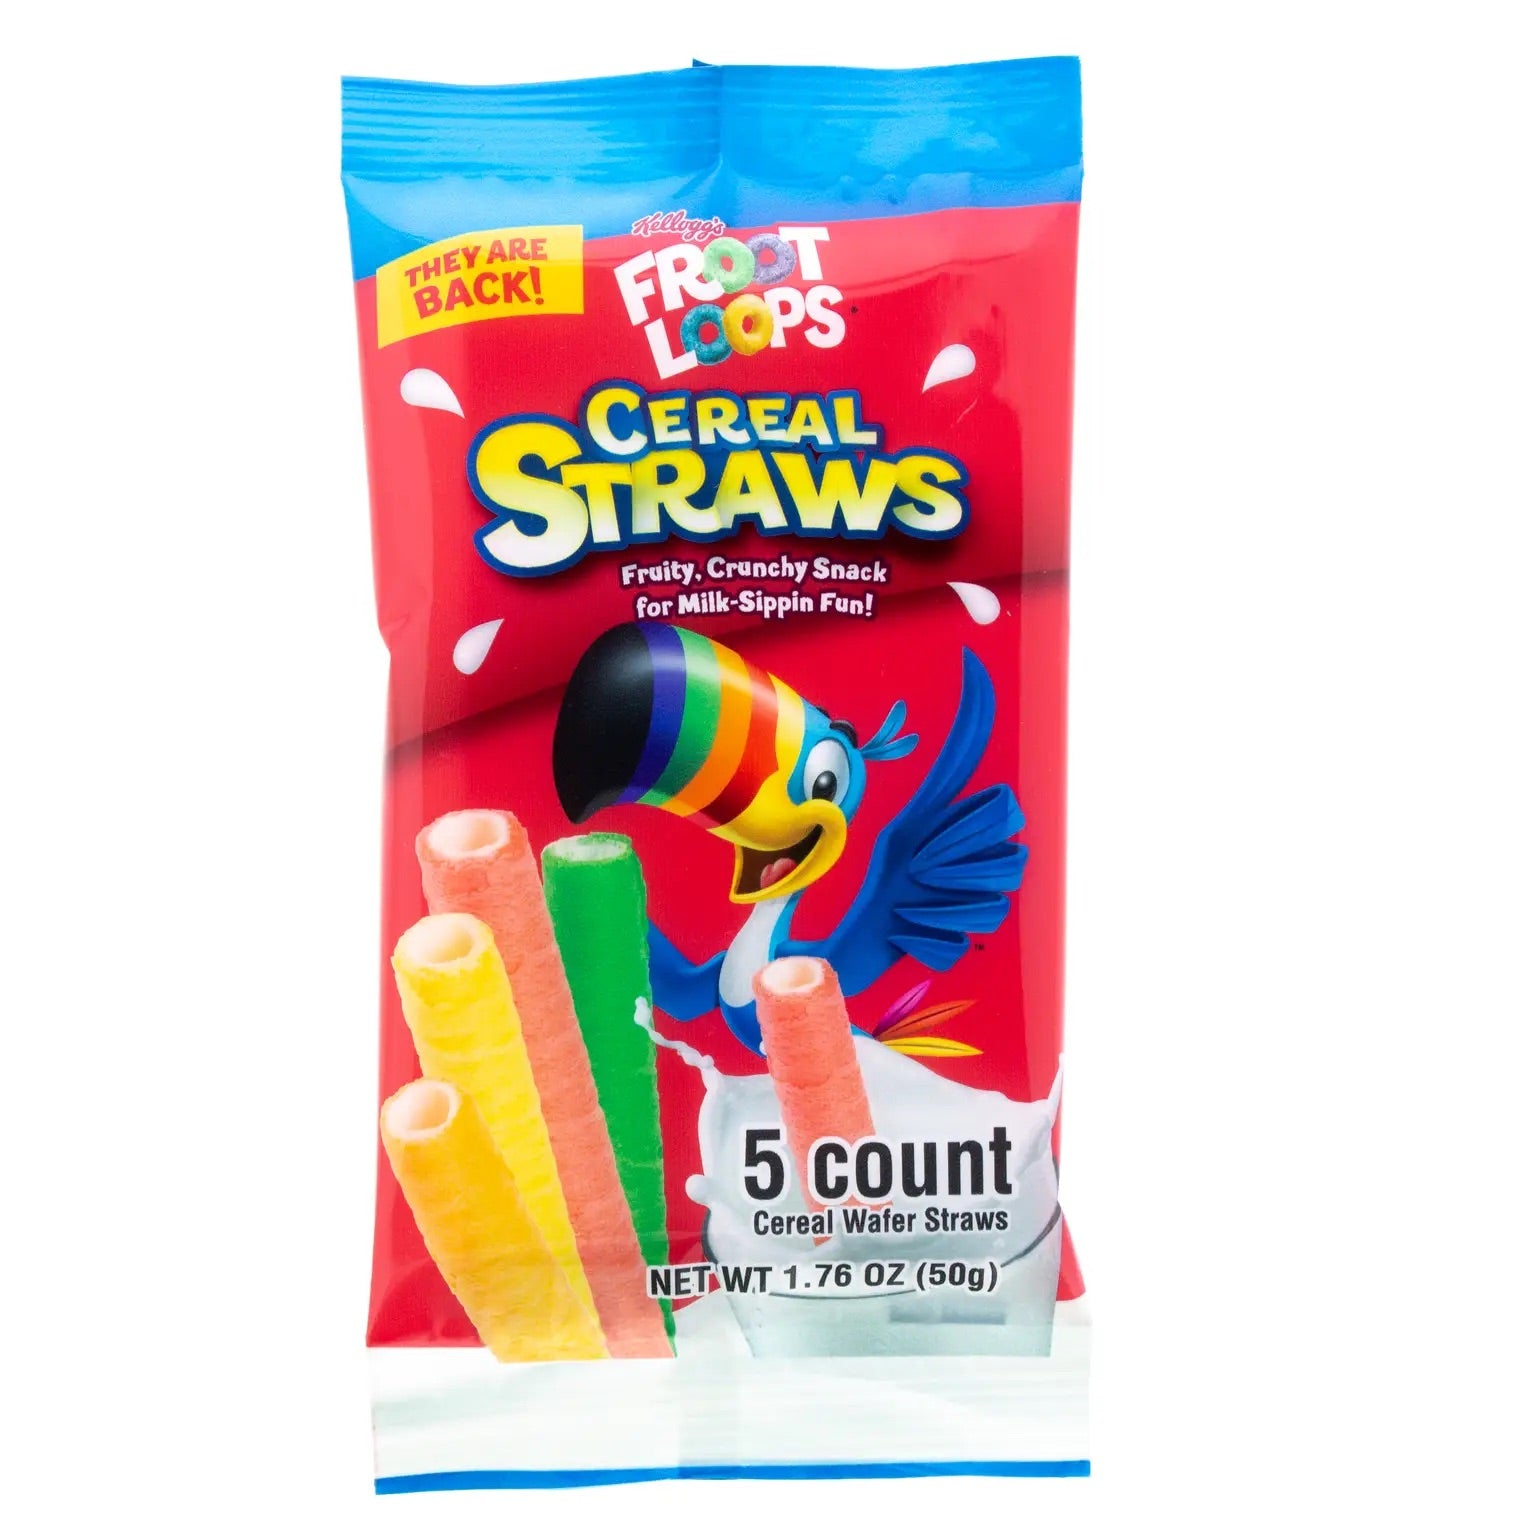 Froot Loops Cereal Straws - 5 Count